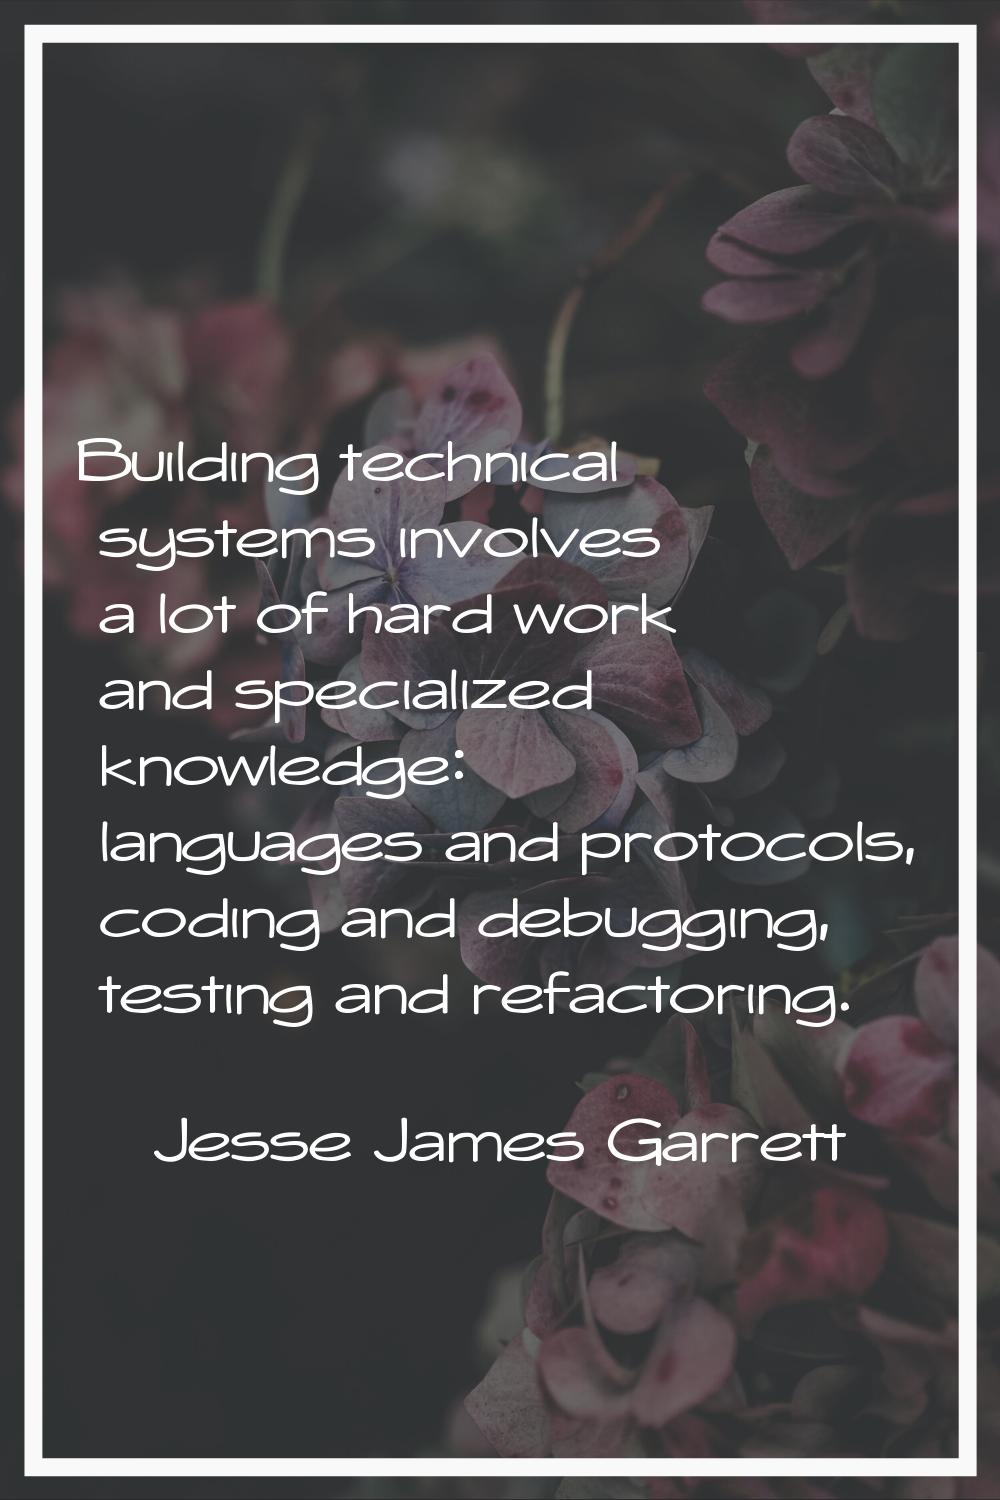 Building technical systems involves a lot of hard work and specialized knowledge: languages and pro